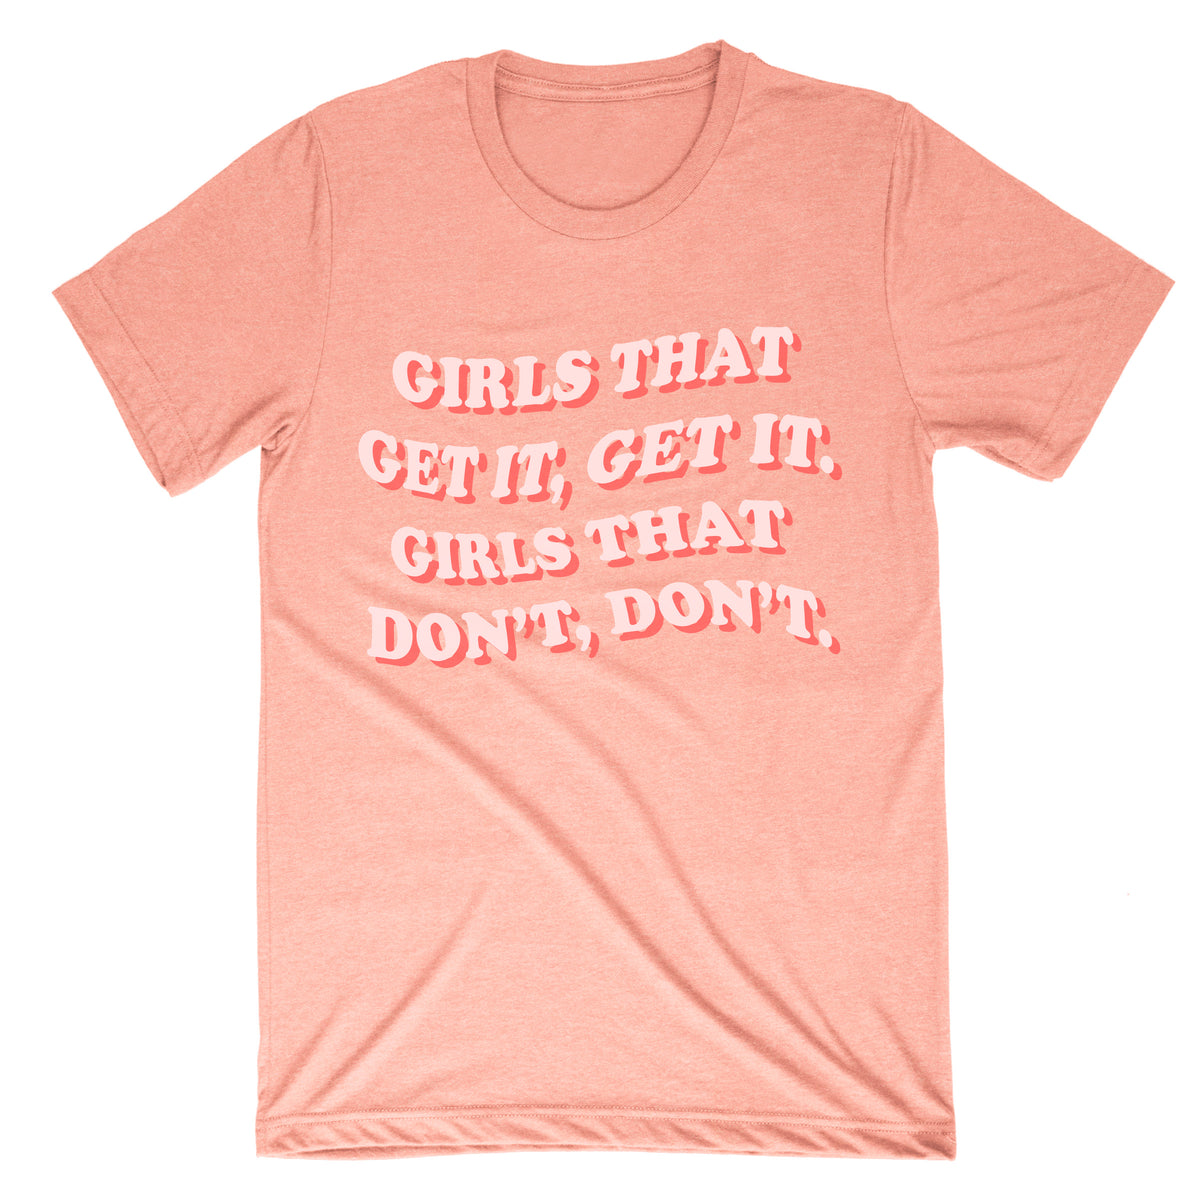 The Girls That Get it, Get It Tee